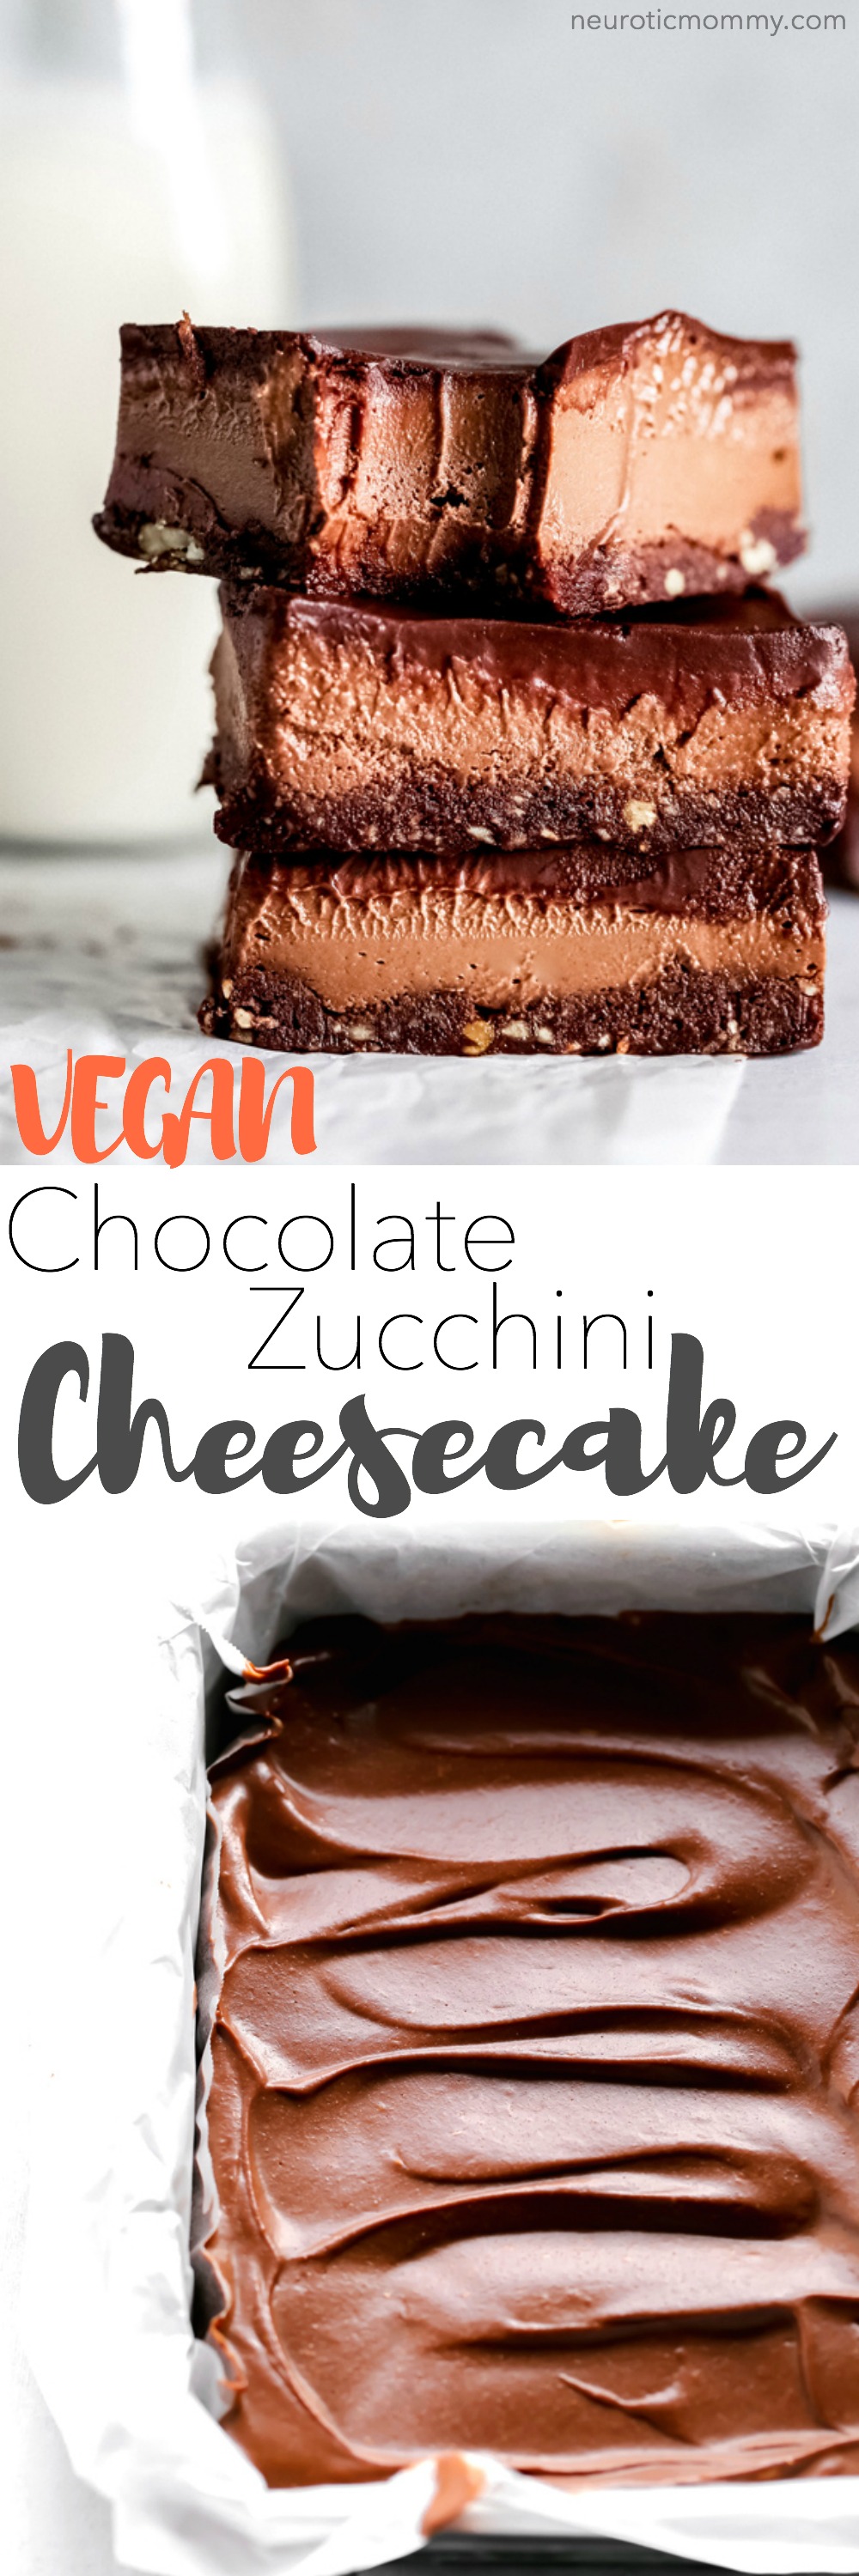 Vegan Chocolate Zucchini Cheesecake - The healthy, triple chocolate treat you've been waiting for. Rich, decedent, super chocolatey, and loaded with sneaky veggies. You would never know! NeuroticMommy.com #vegancheesecake #chocolatecheesecake #desserts